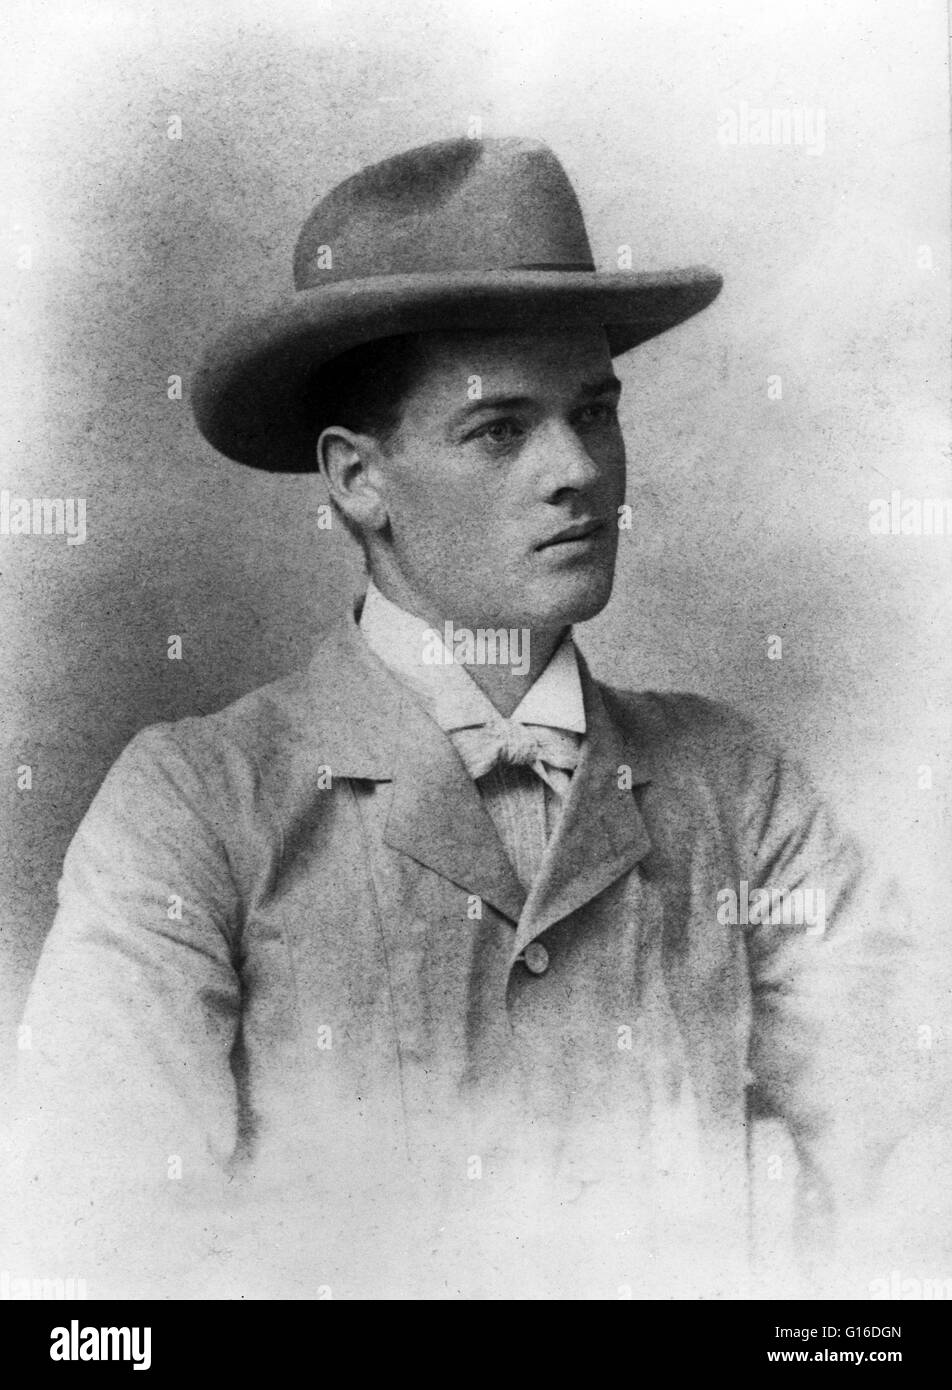 Hoover, age 23, taken in Perth, Australia, 1898. Herbert Clark Hoover (August 10, 1874 - October 20, 1964) was the 31st President of the United States (1929-1933). Hoover easily won the Republican nomination, despite having no previous elected-office expe Stock Photo